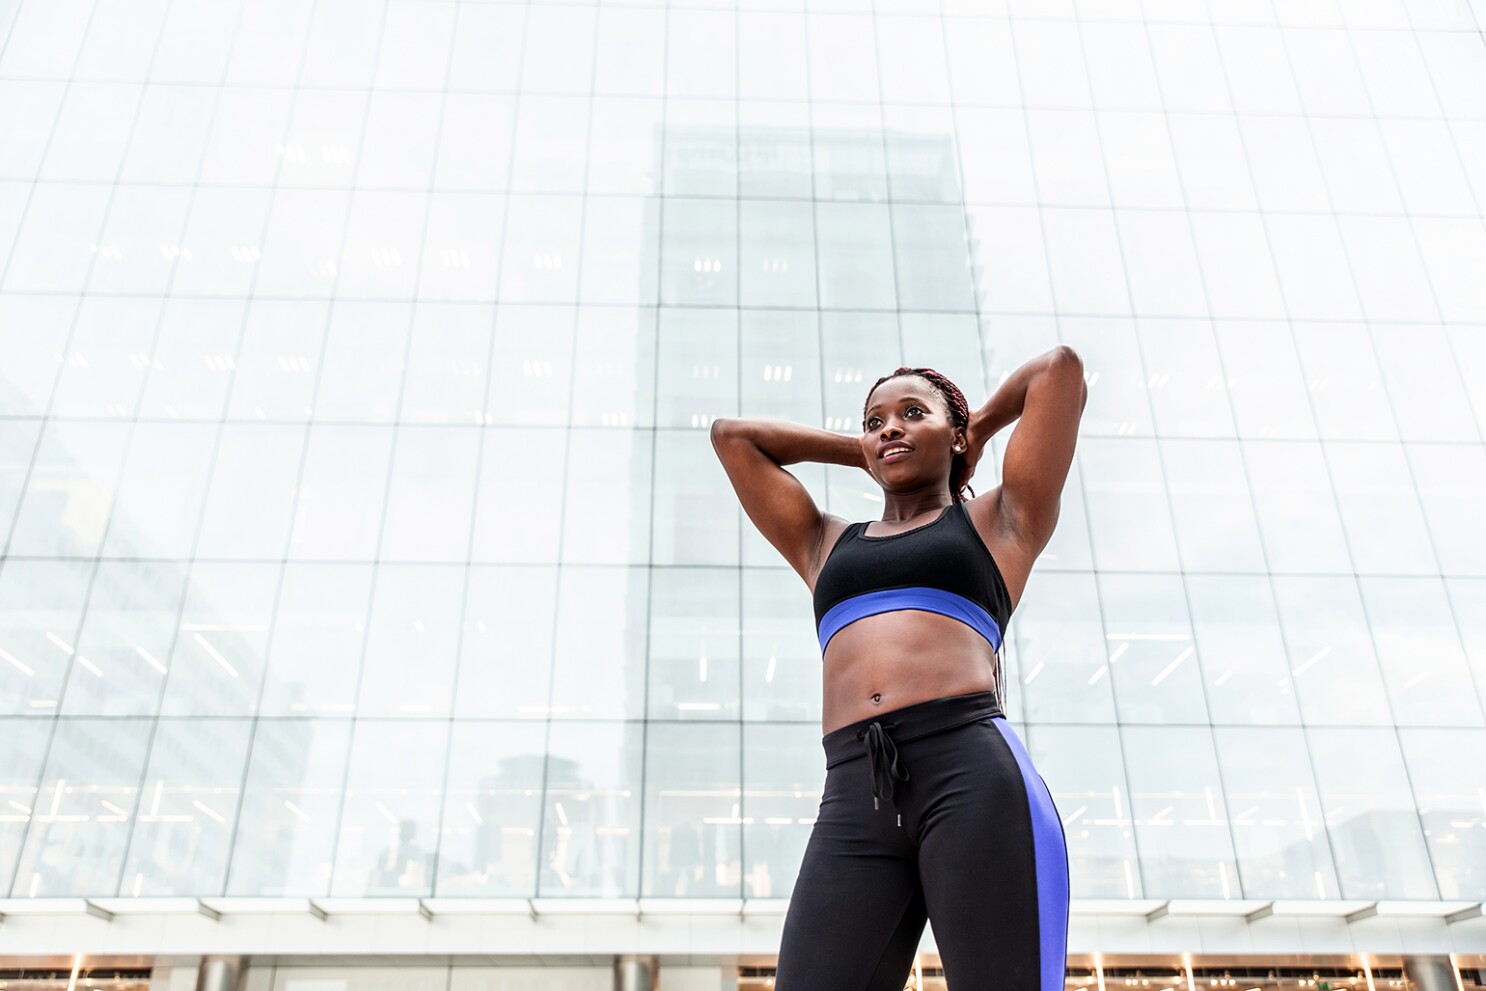 7 Fitness Tips to Start Rocking Your Best Curves